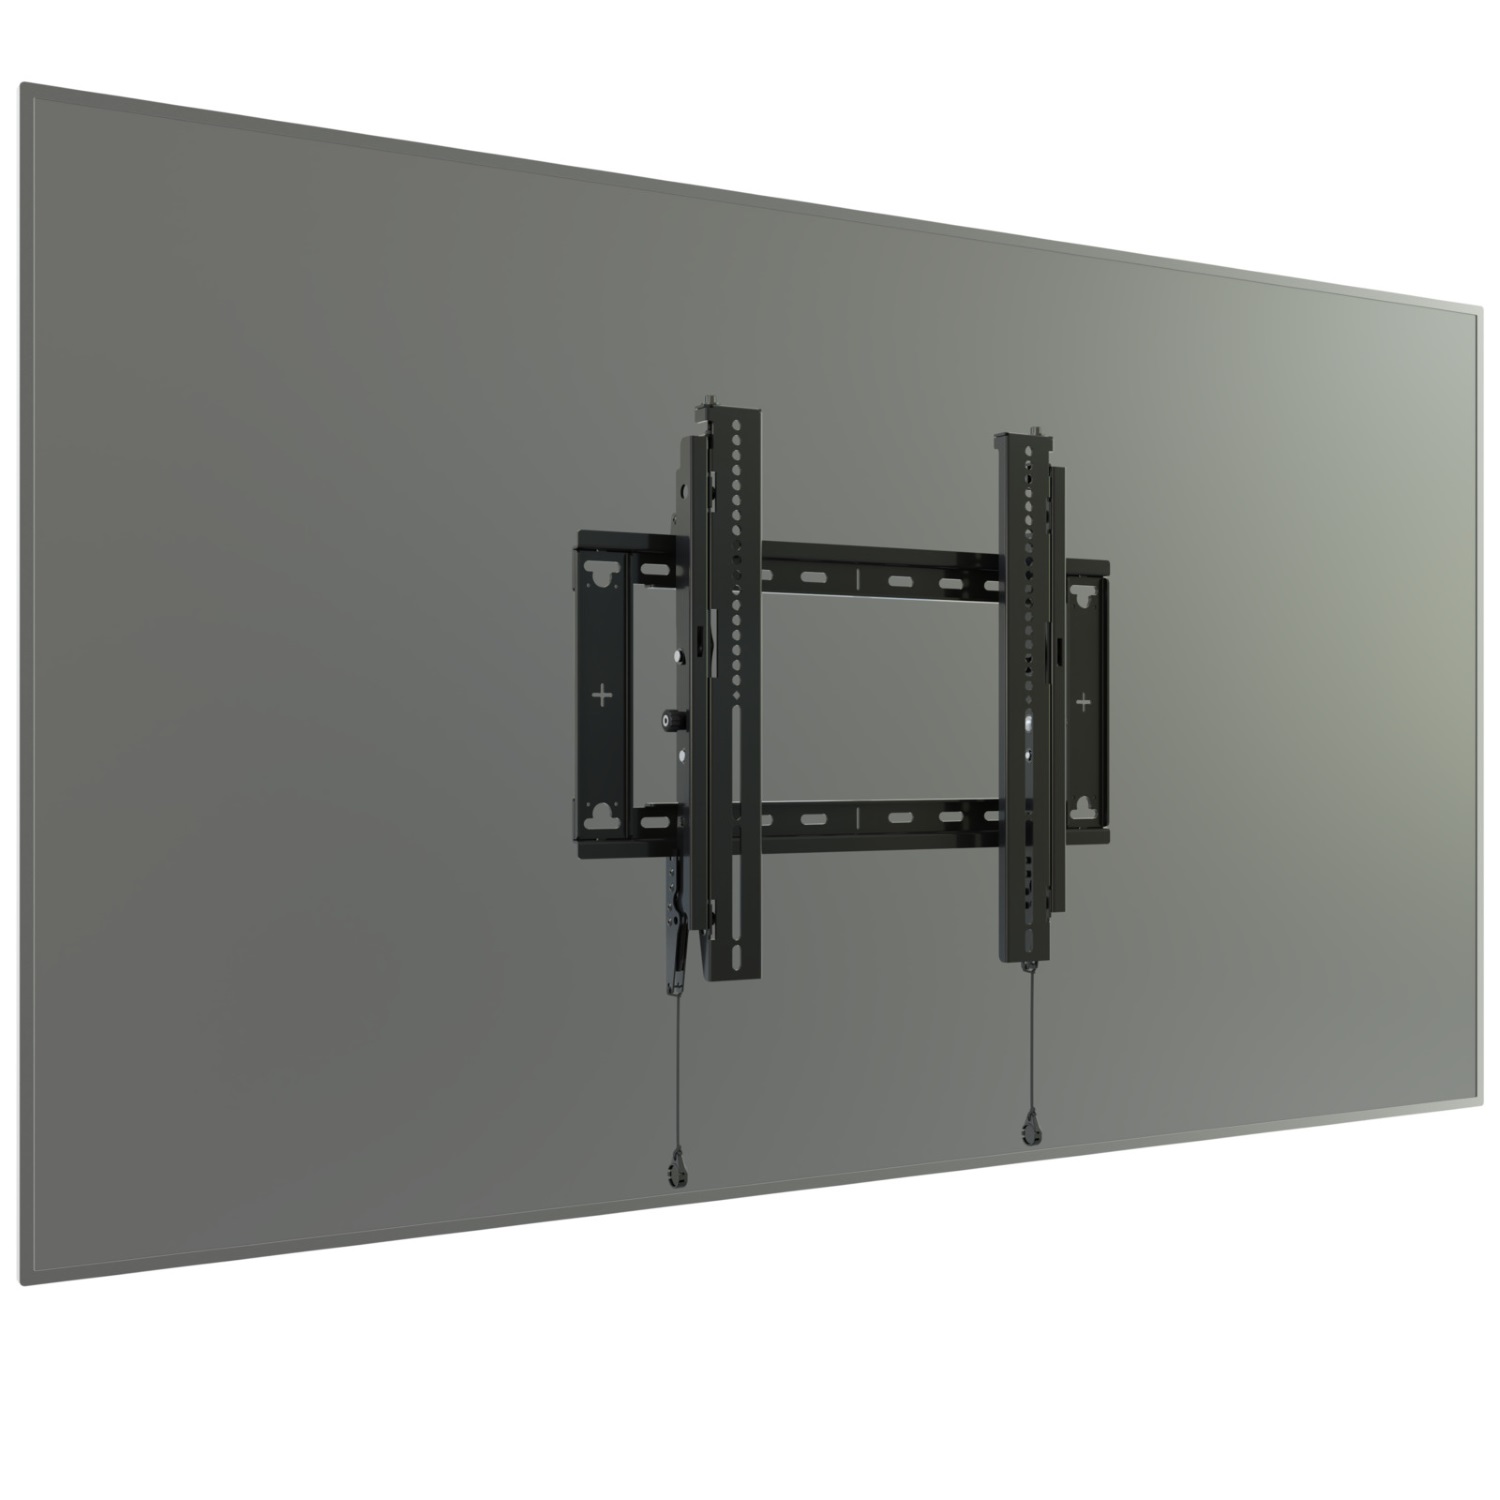 Chief RMT3 Wall Mount